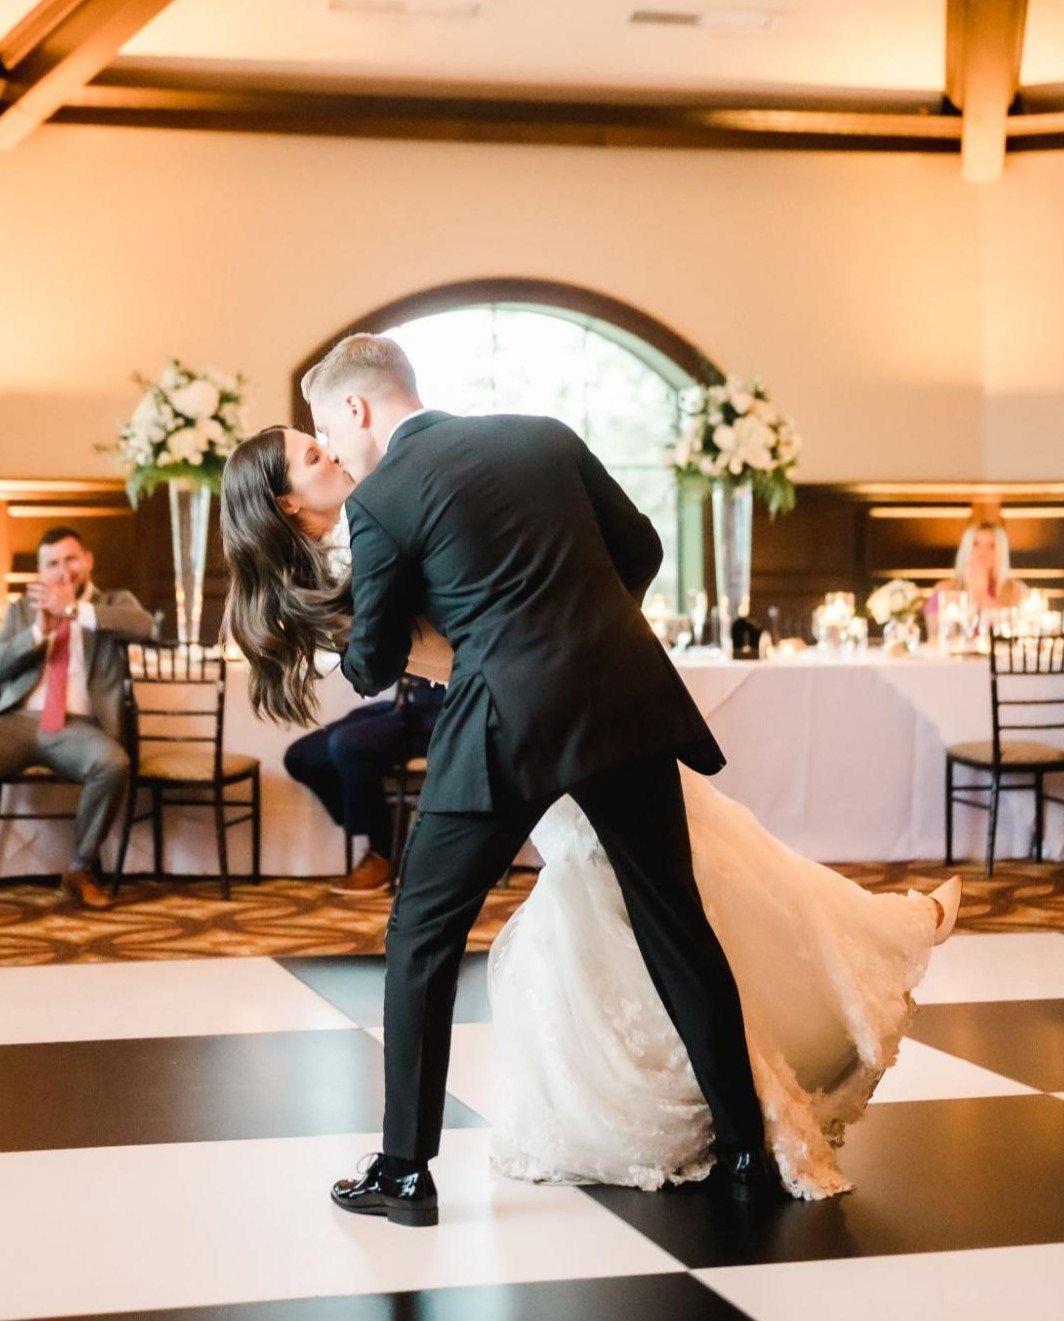 Ready to hit the dance floor? 🕺💃 Total Events has got you covered with an array of options to suit every style and vibe! From classic wood to checkered, our dance floors are sure to get the party started.

Photo: @jpelario
Venue: @saratoganationale